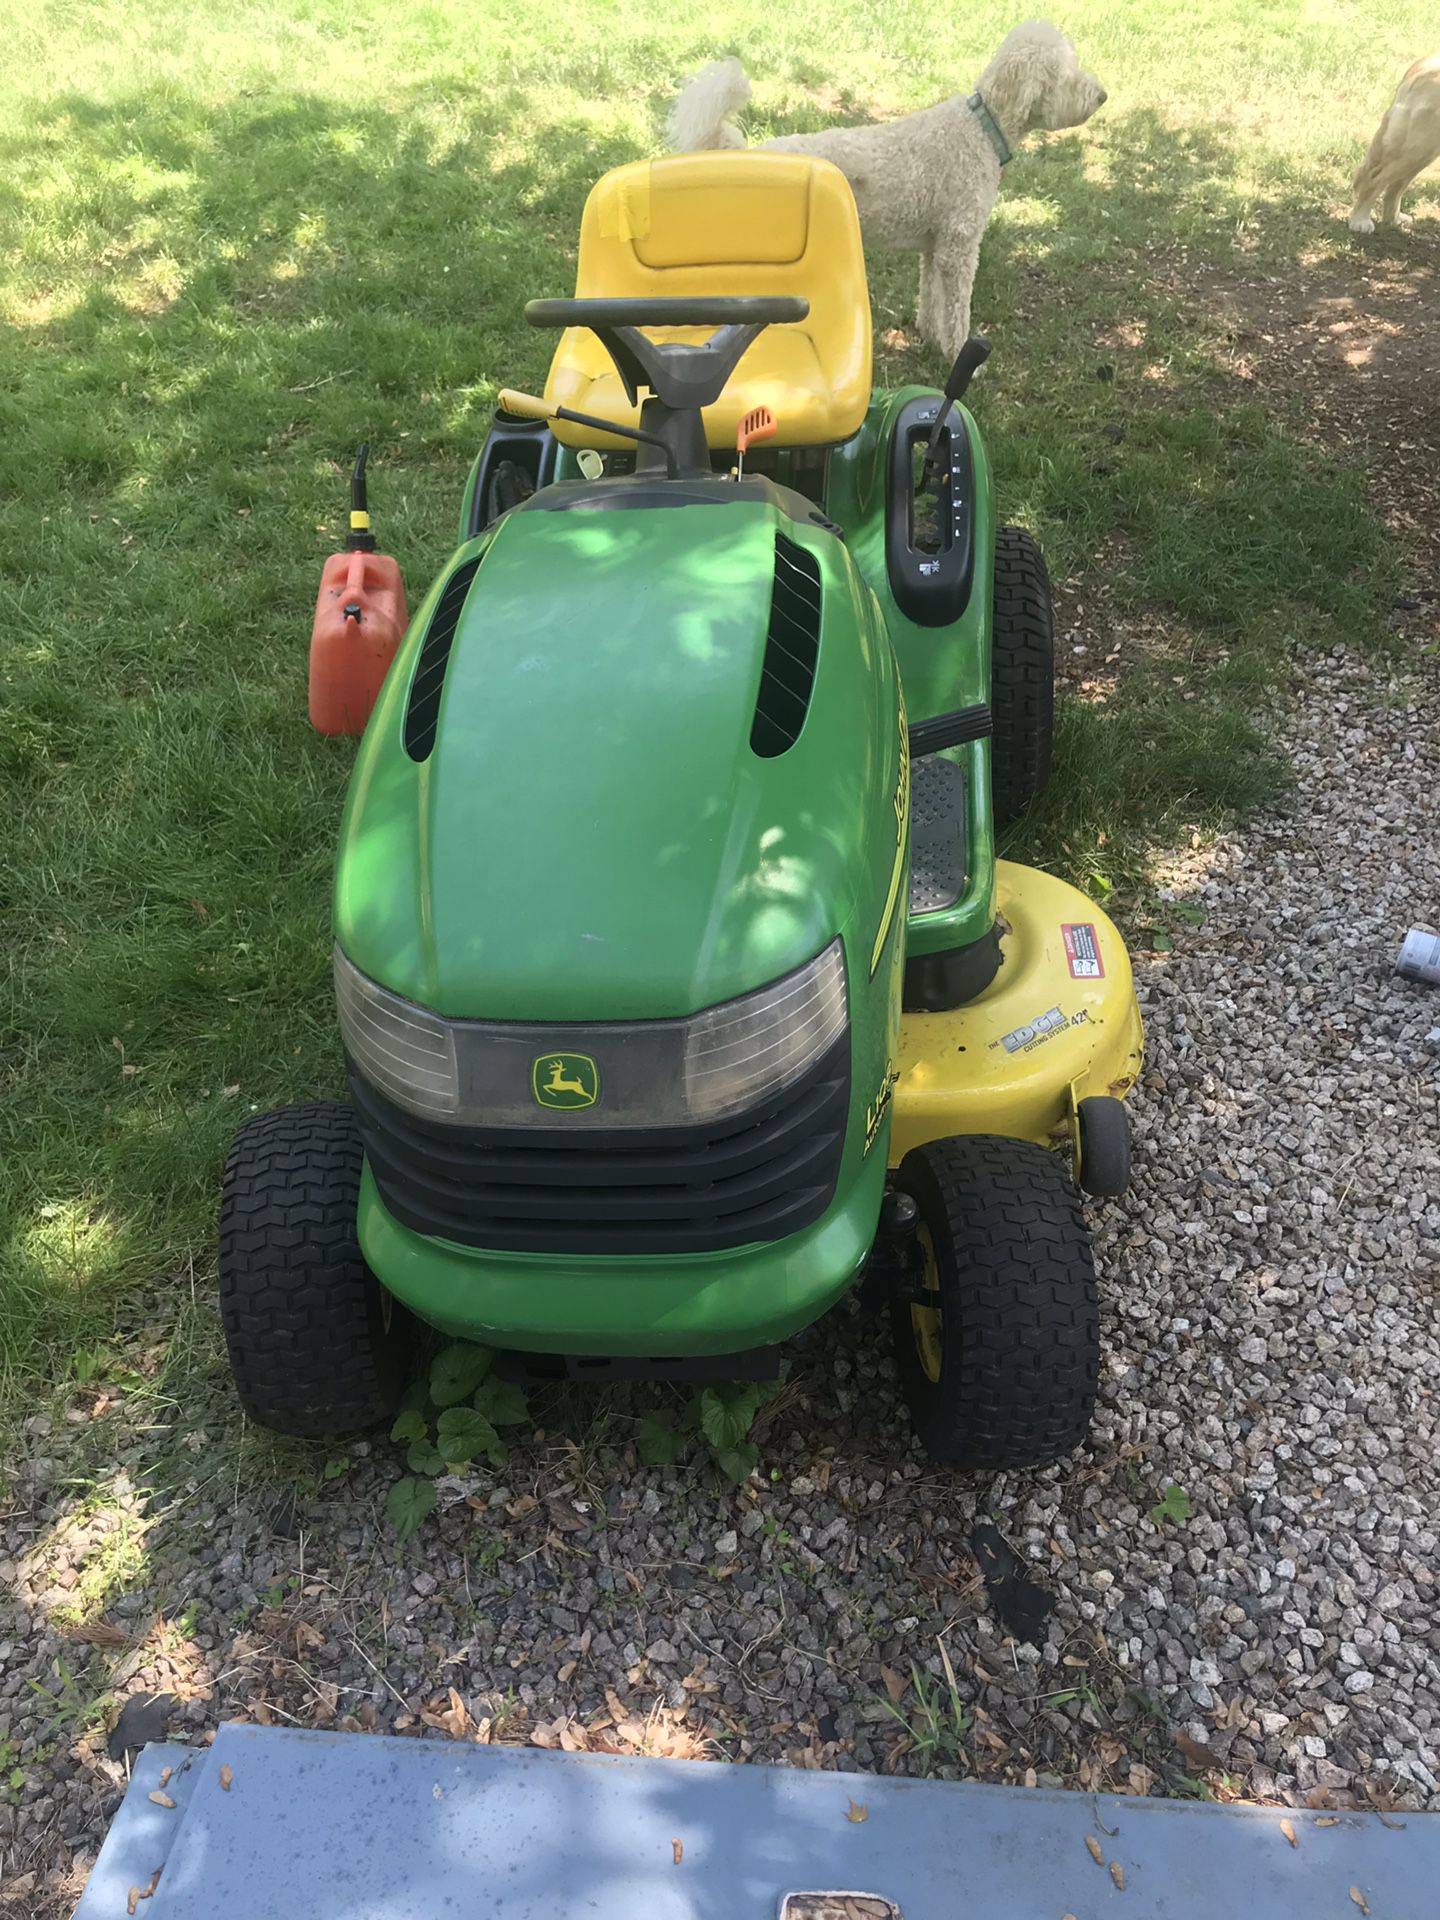 John Deere L108 Lawn Tractor with bagger